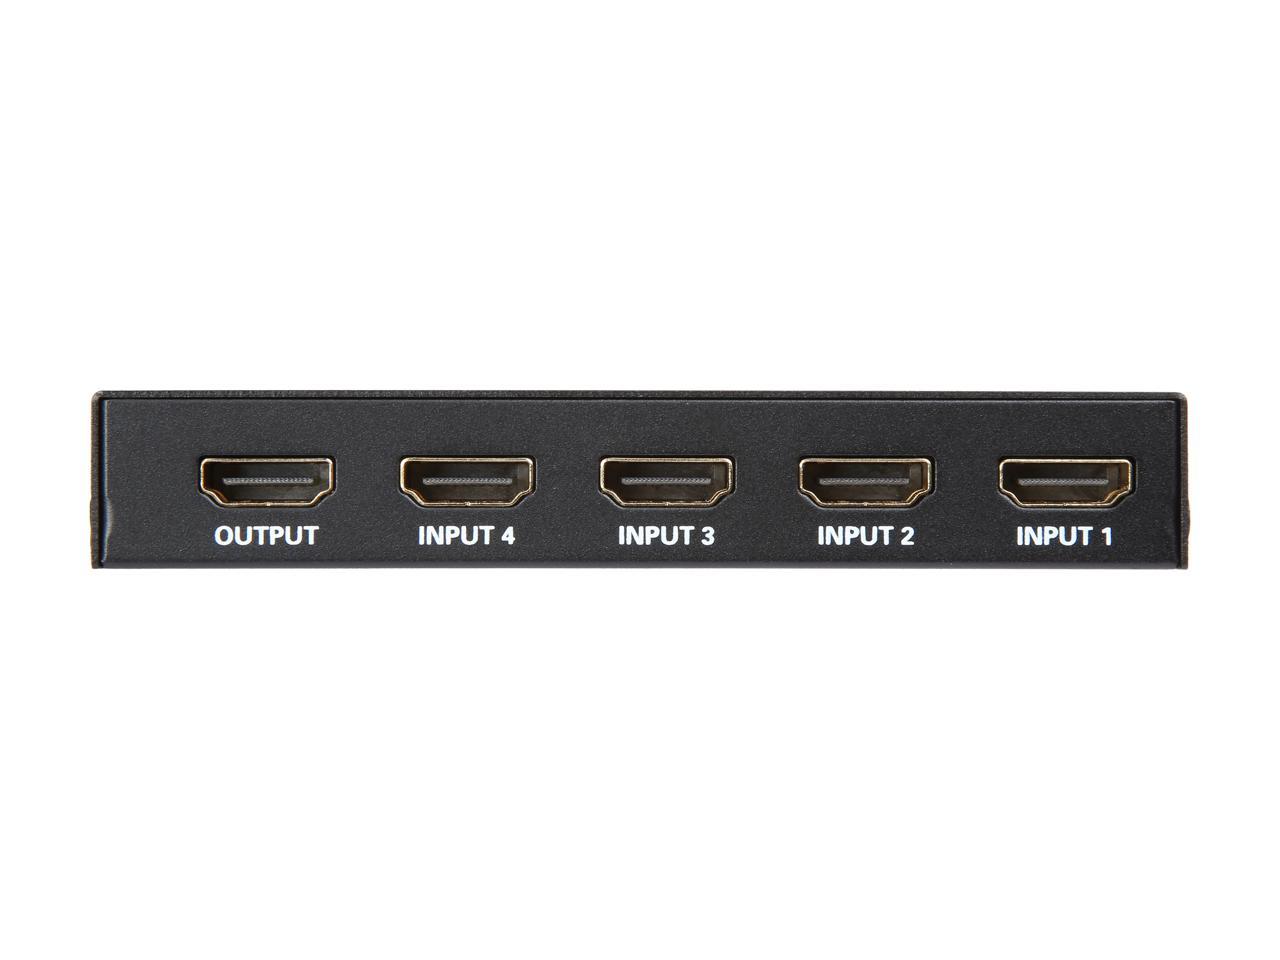 Tripp Lite 4-Port HDMI Switch for Video and Audio, 4K x 2K UHD @ 60 Hz (HDMI F/4xF) with Remote Control (B119-004-UHD)